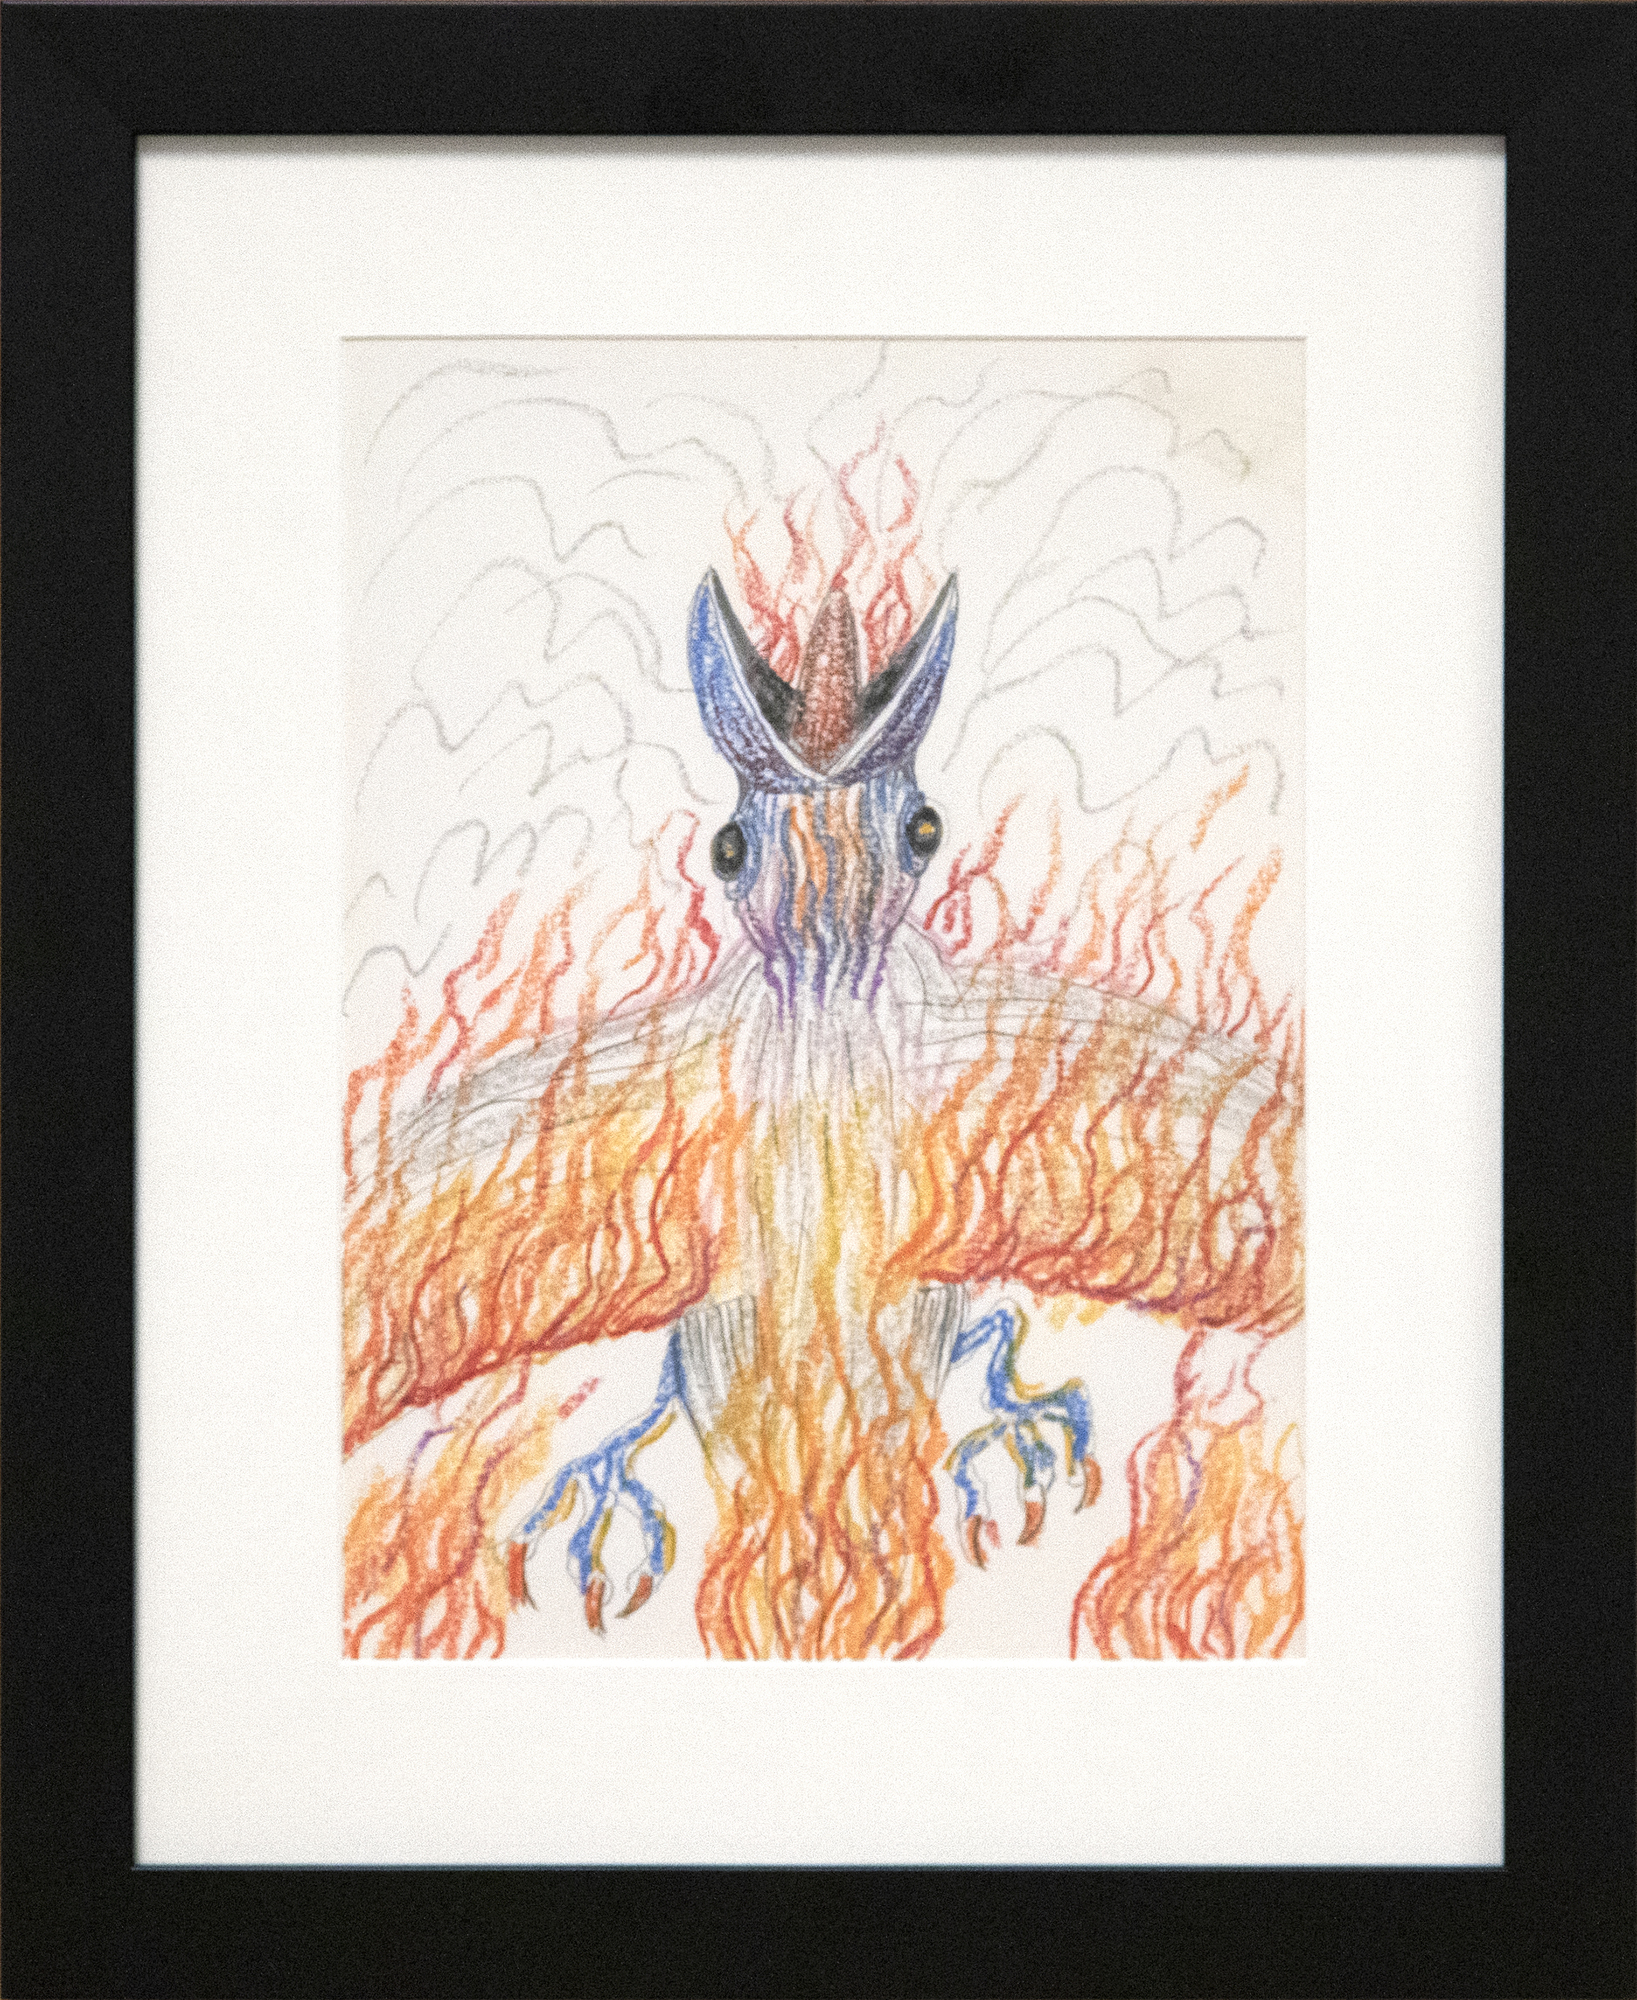 IRVING NORMAN - Untitled (Fire Bird) - graphite and crayon on paper - 12 x 8 7/8 in.